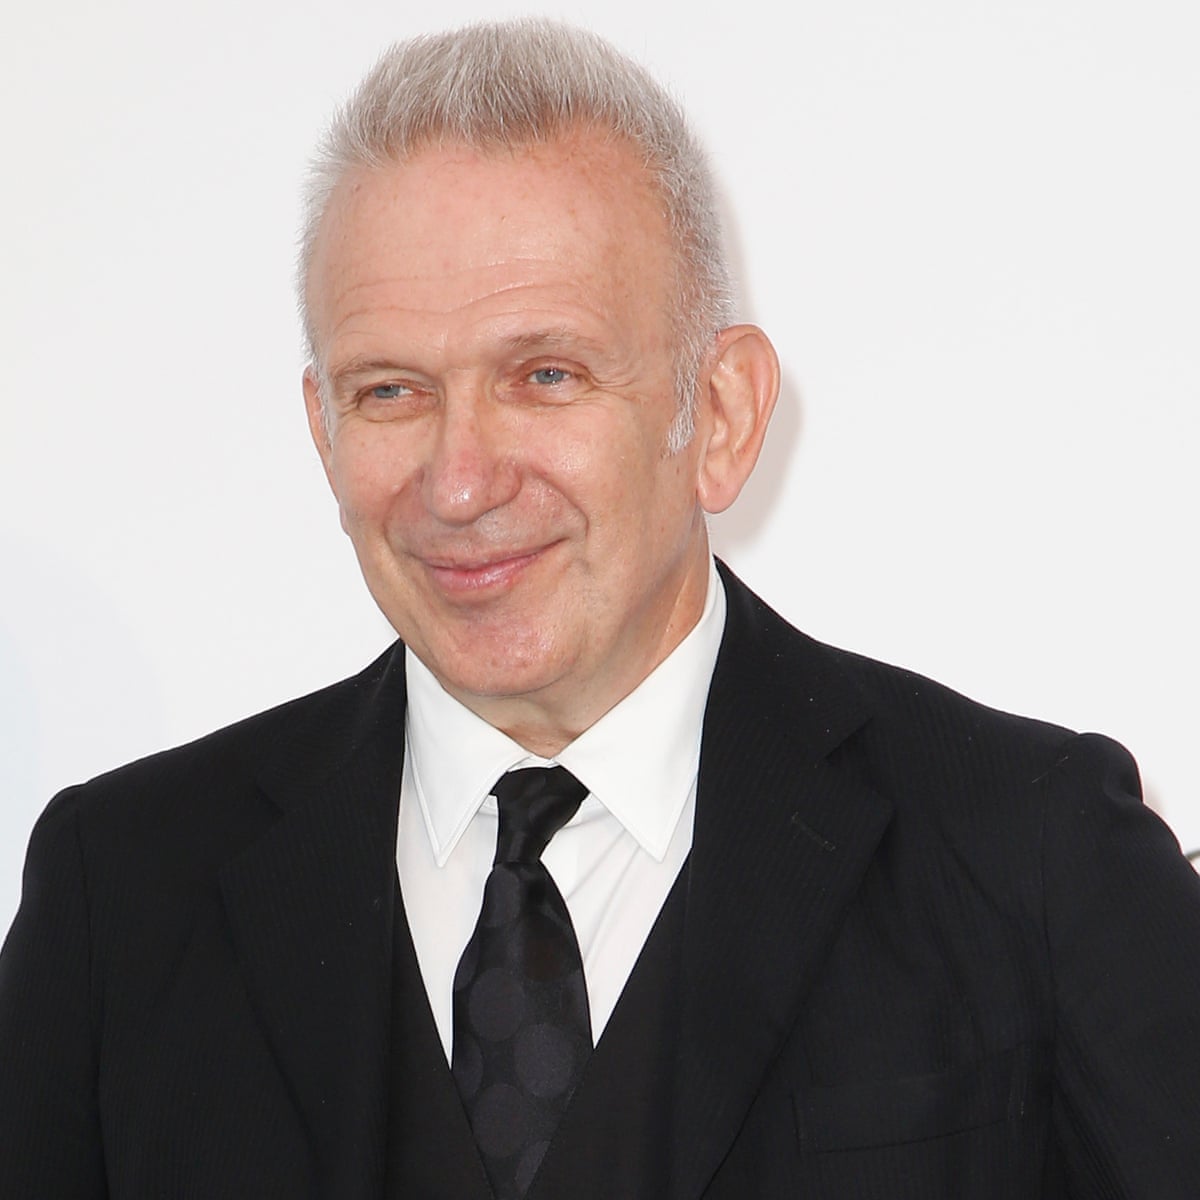 Jean-Paul Gaultier bows out as fashion designer after 50 years, Jean Paul  Gaultier